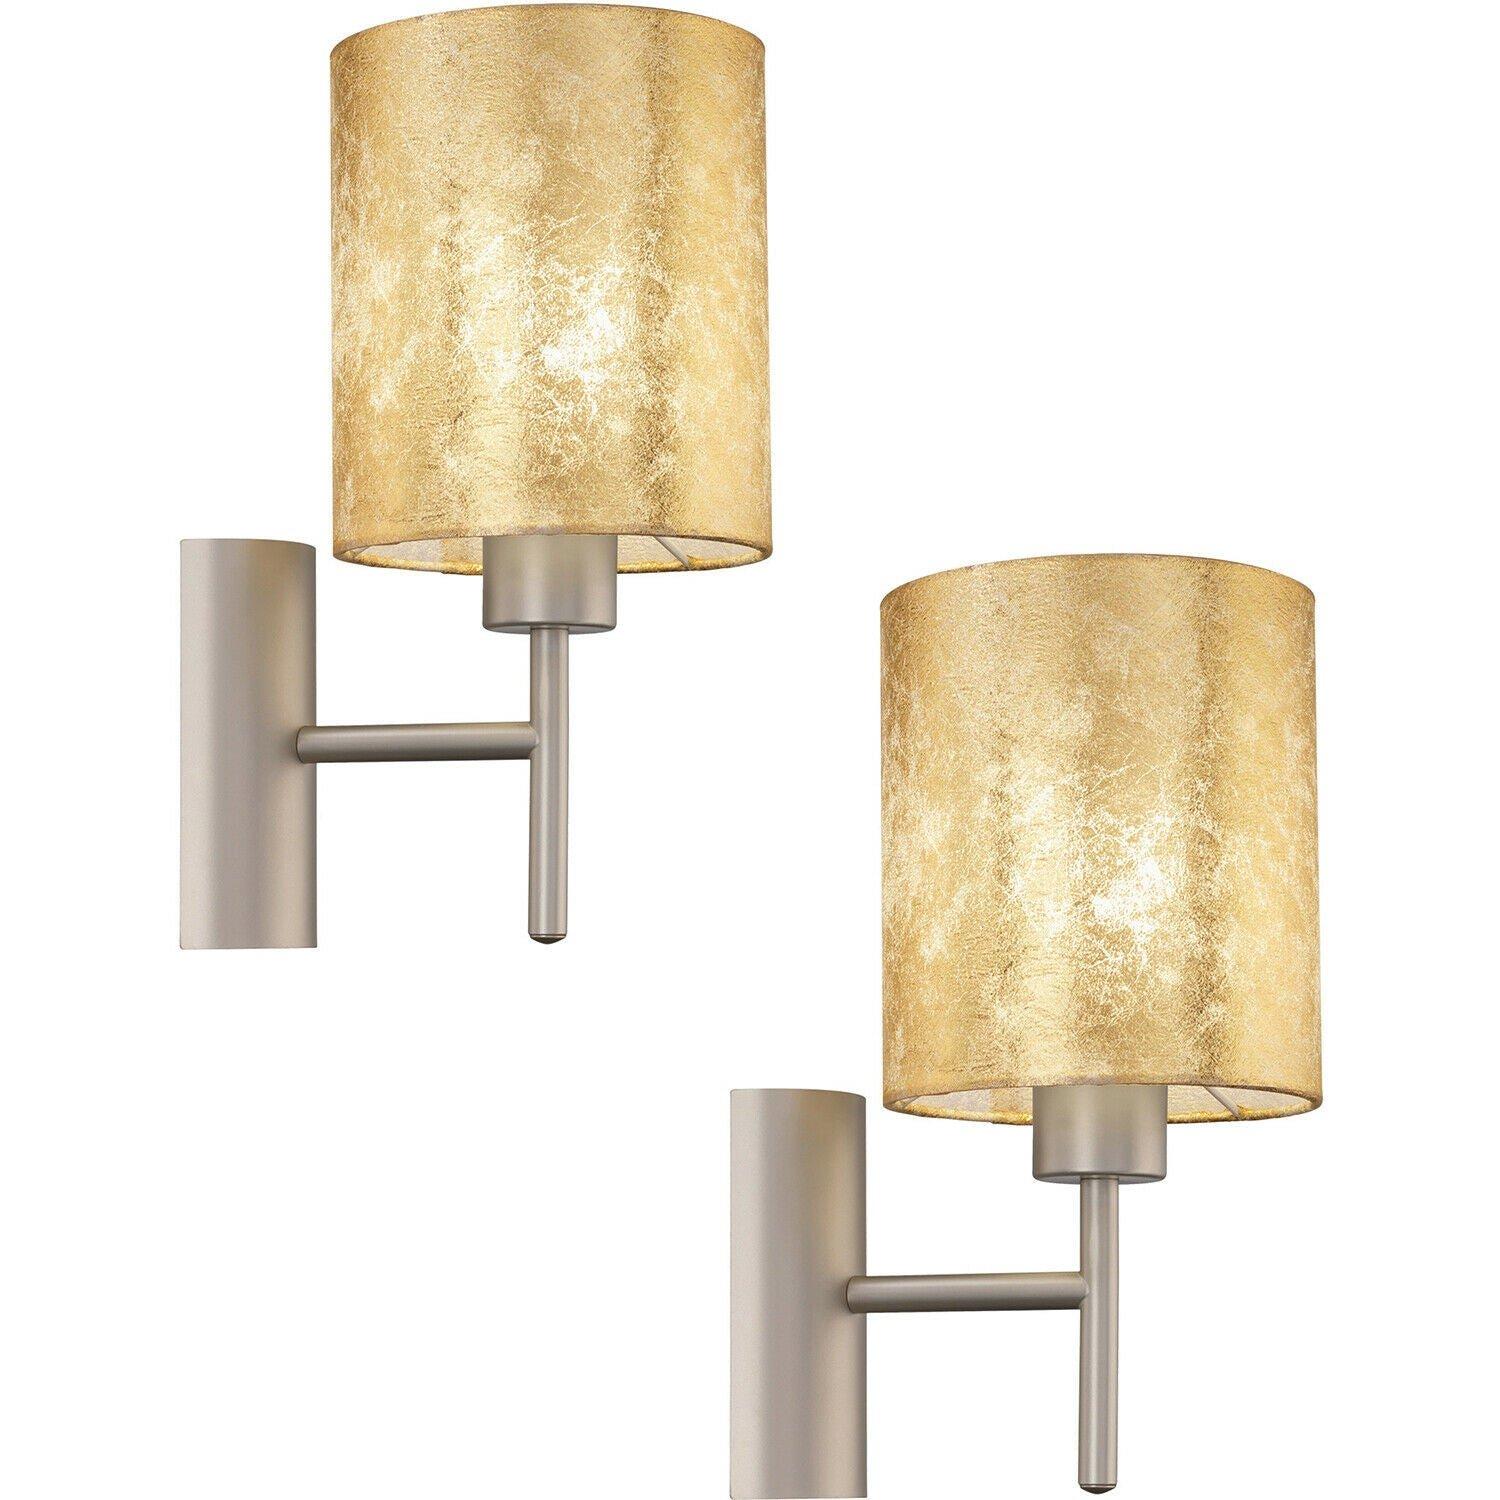 2 PACK Wall Light Colour Champagne Steel Circular Shade Gold Fabric E27 1x60W